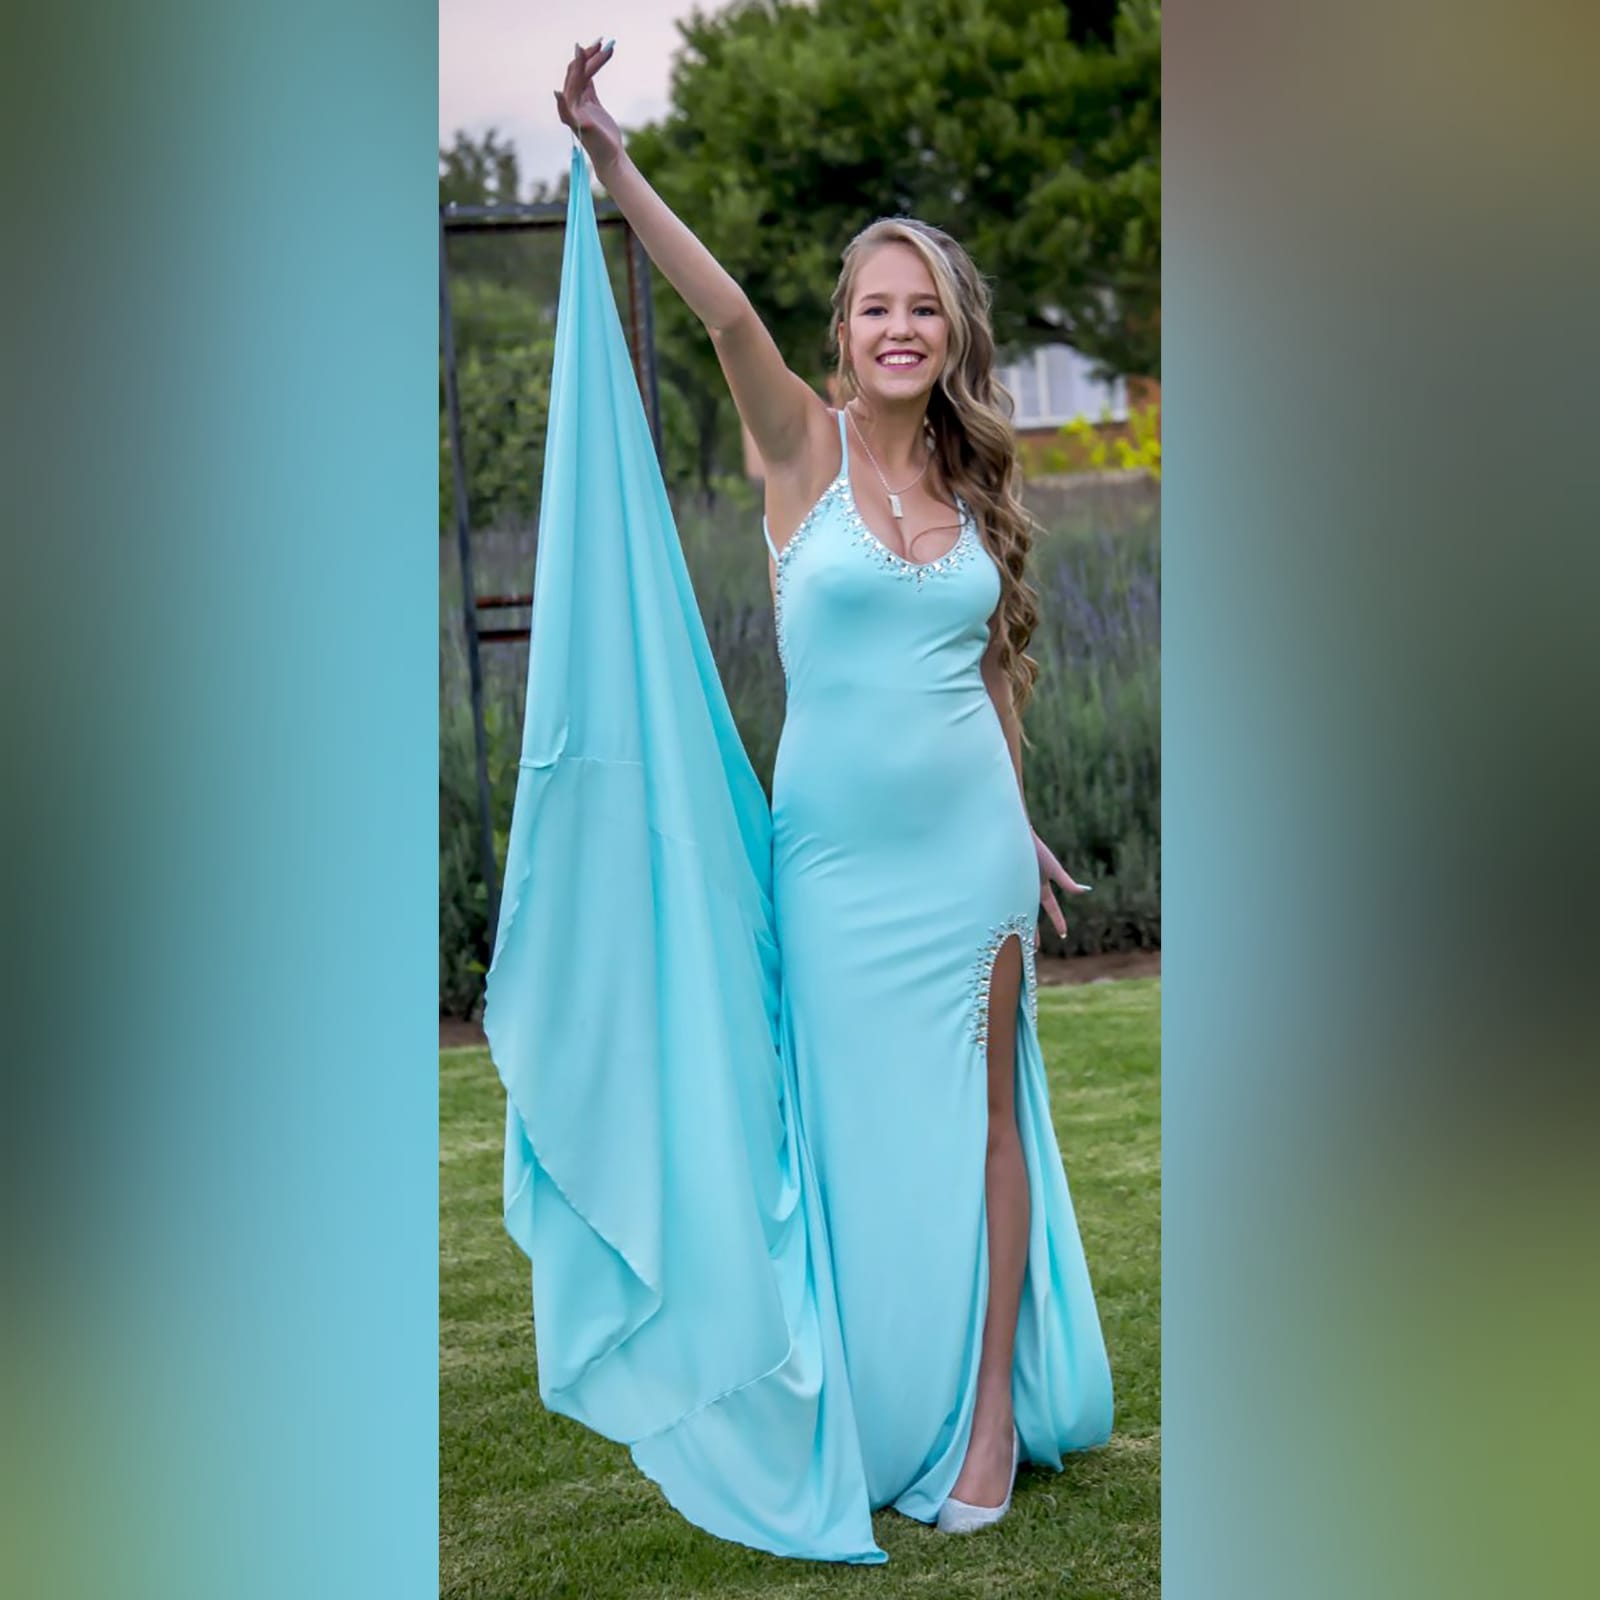 Aqua blue and silver prom dress 2 aqua blue and silver prom dress with a rounded neckline, open low v back with thin crossed straps, slit and a train. Dress detailed with silver beads and stones.